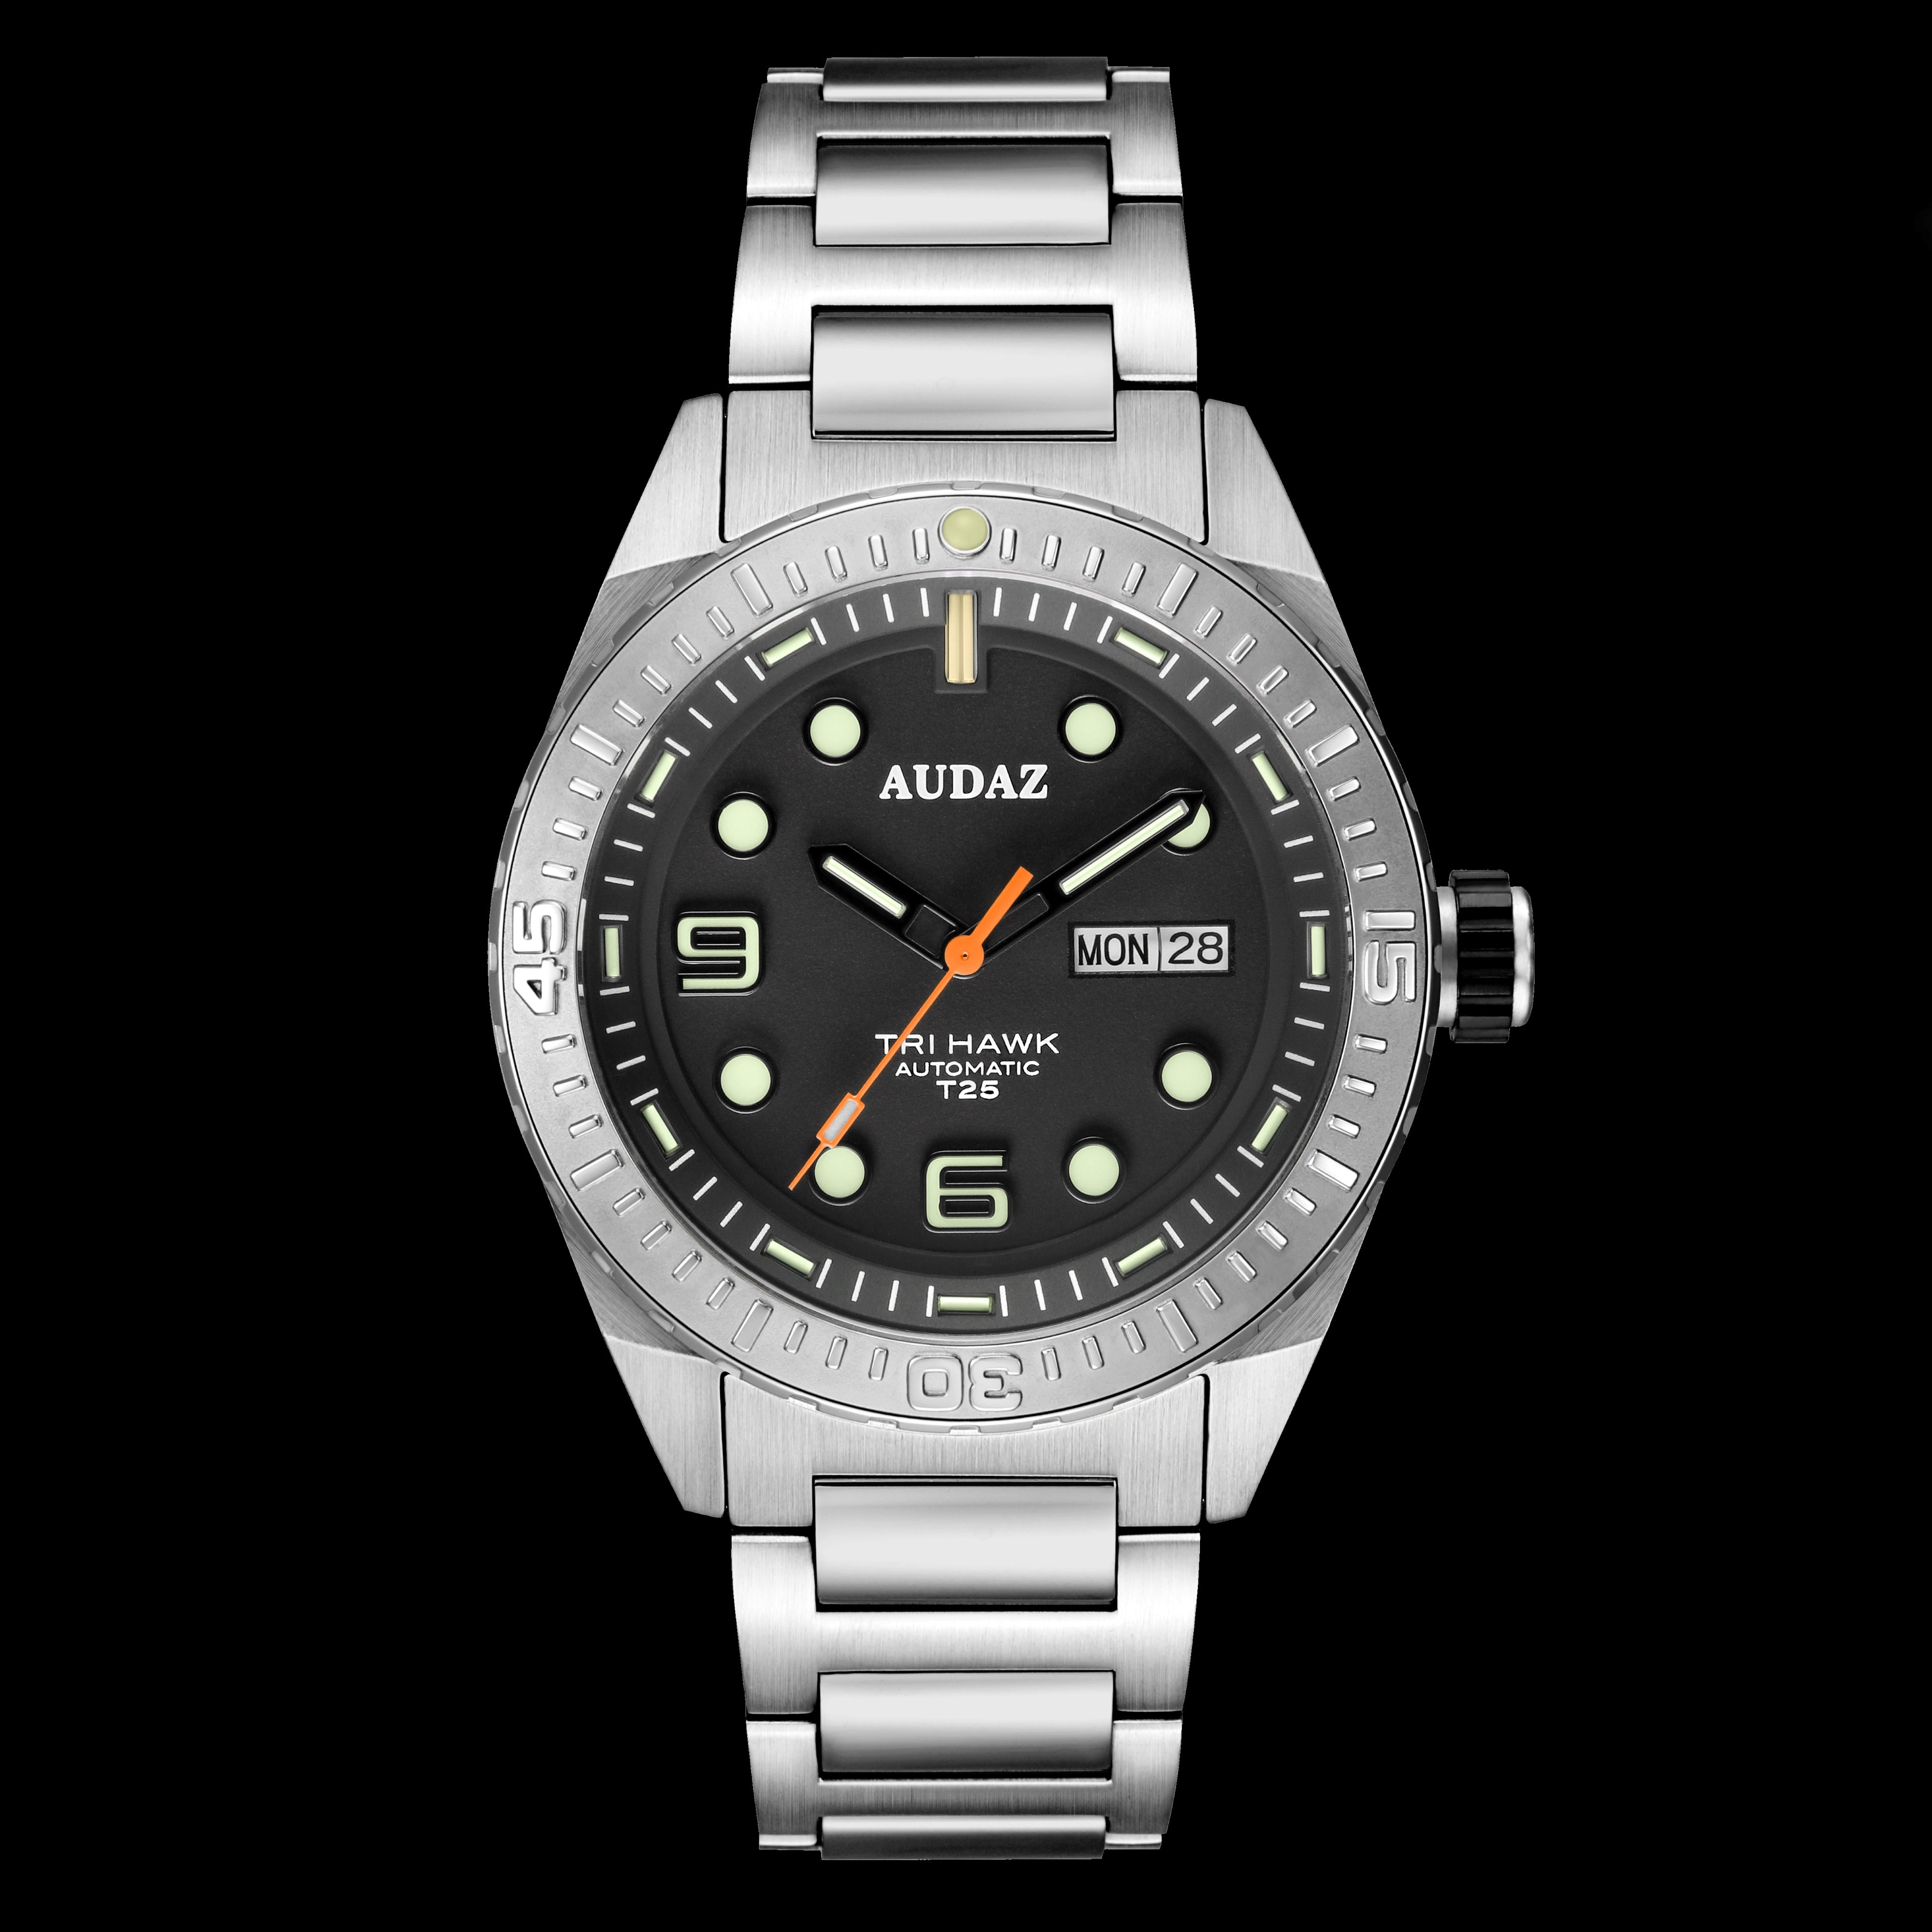 Tri-Hawk Dive I Watches I - Tubes with Lume Audaz Tritium Dials Automatic Watches